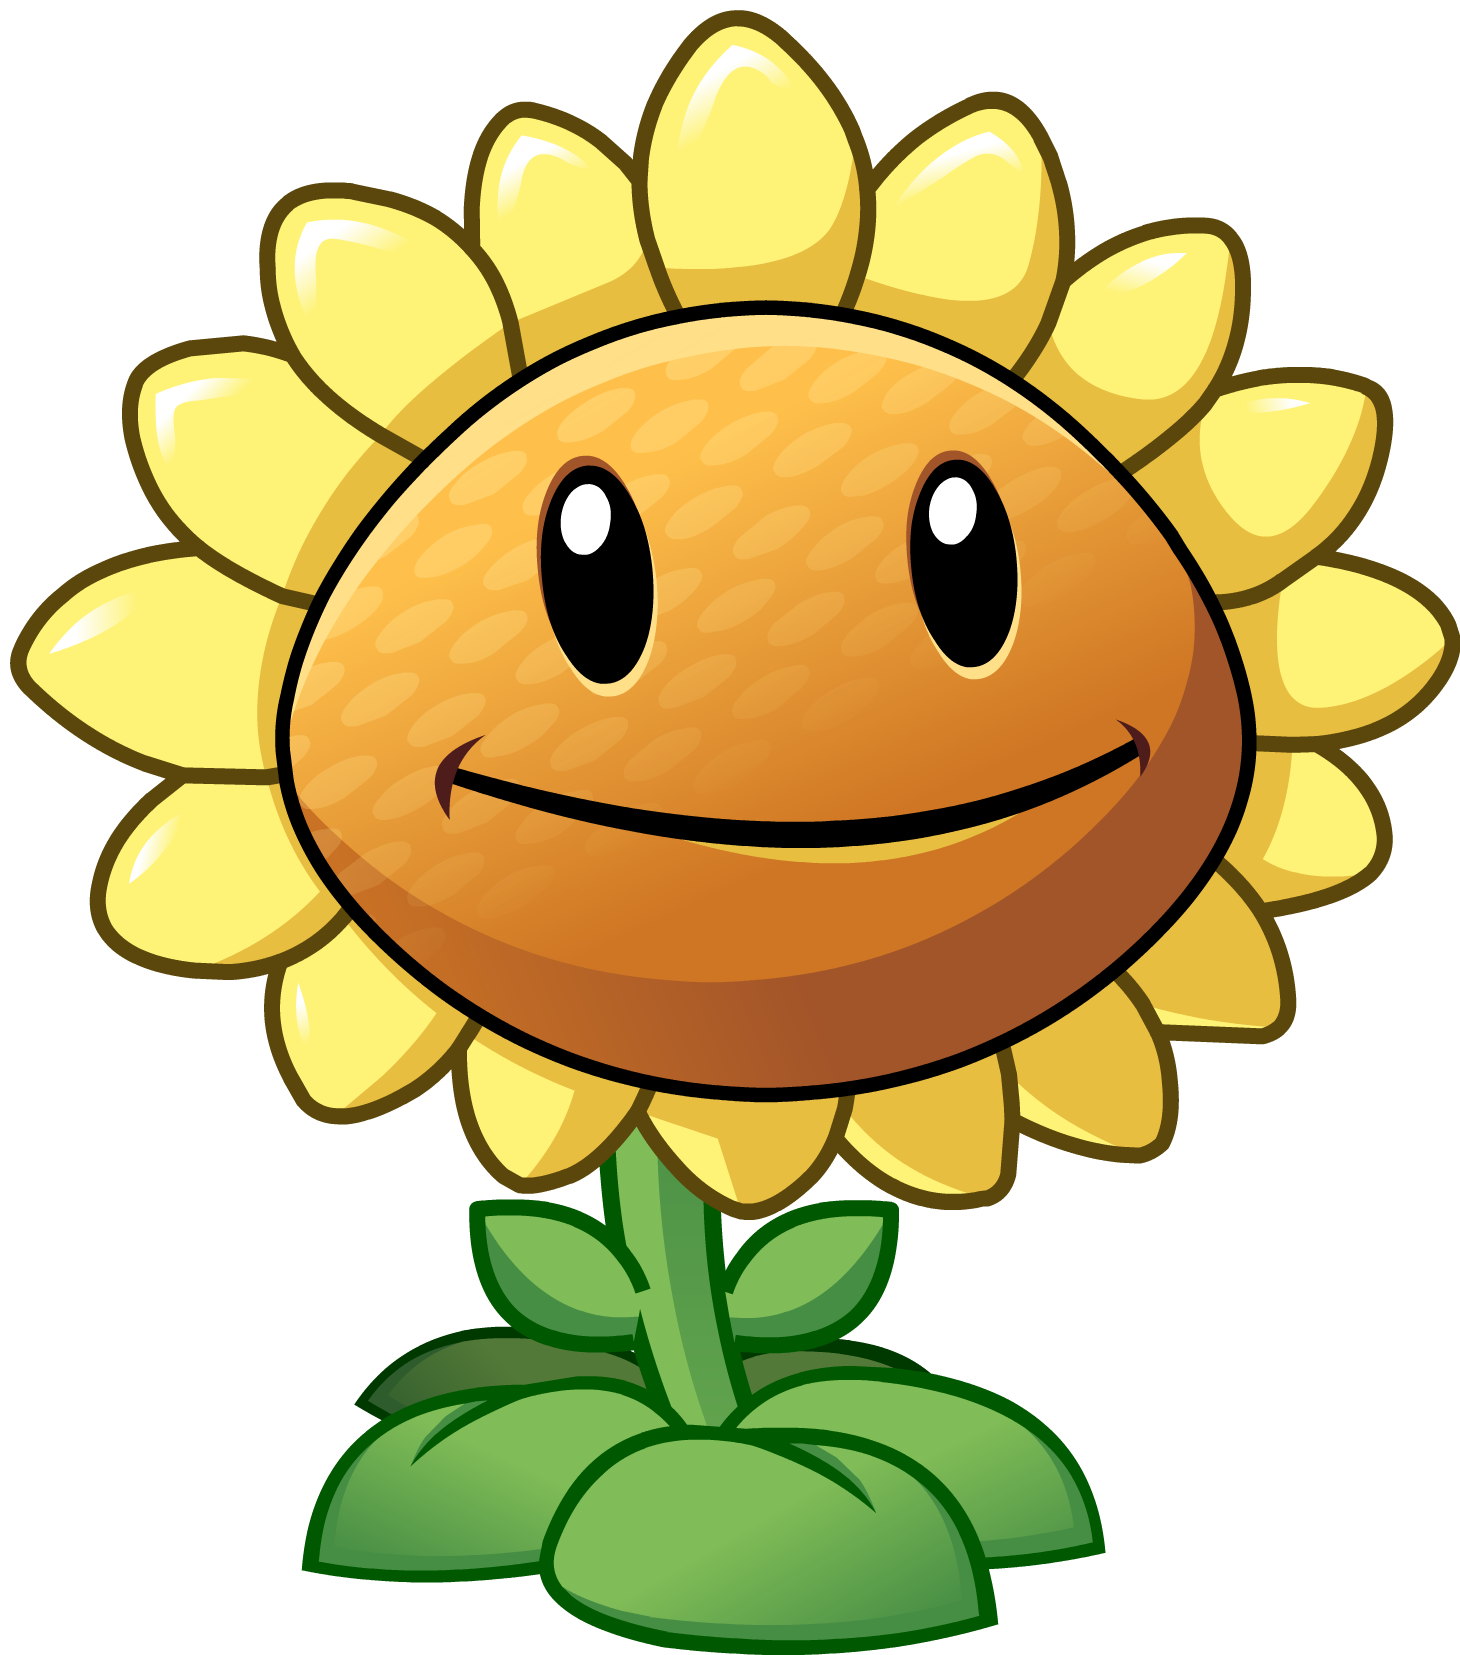 Pics For > Images Of Plants Vs Zombies Characters, Plant versus